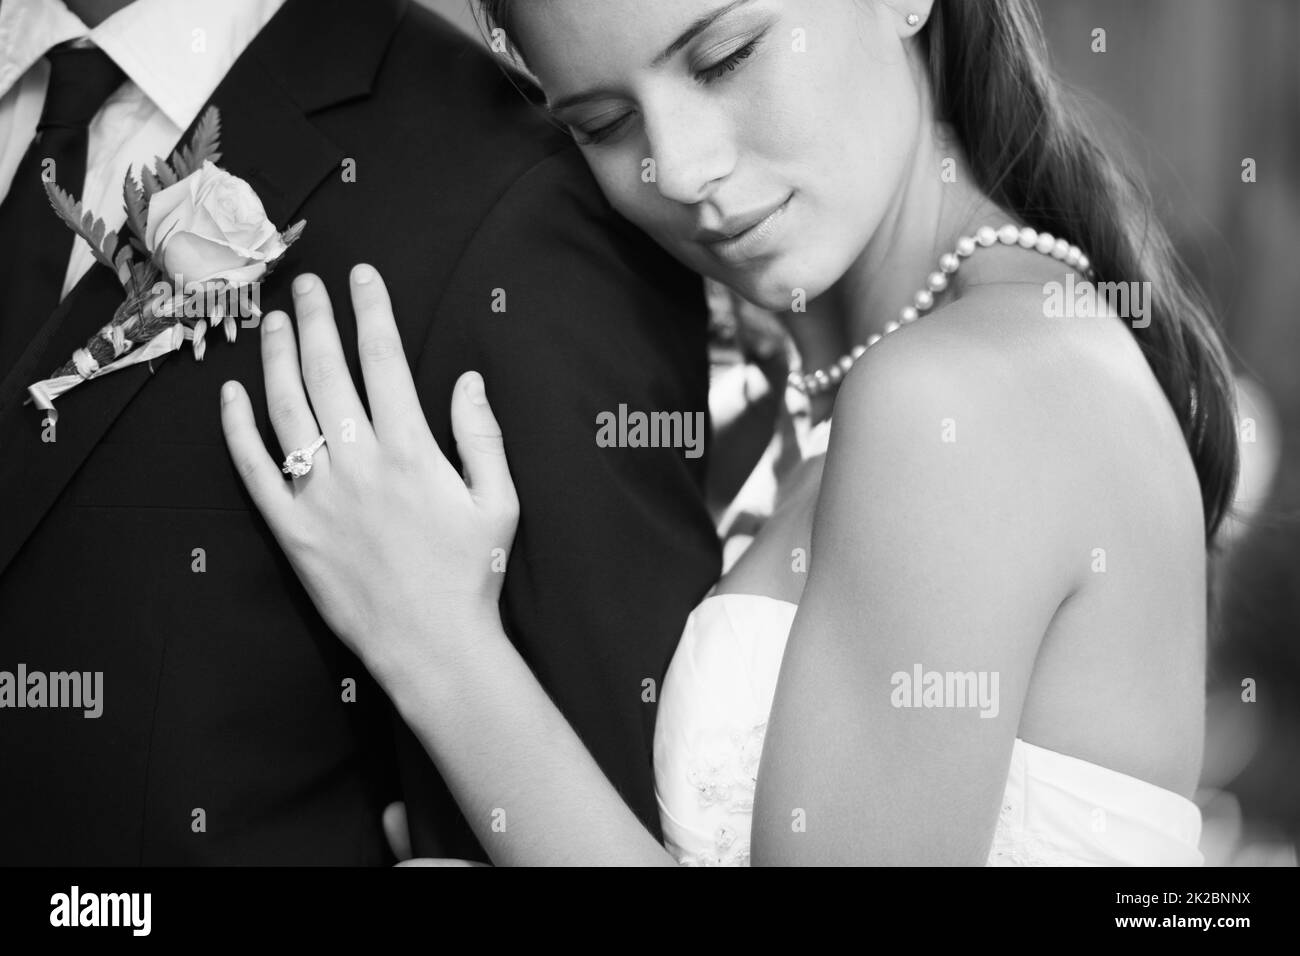 Dreaming in black and white. Black and white image of a beautiful bride embracing her husband from behind lovingly. Stock Photo